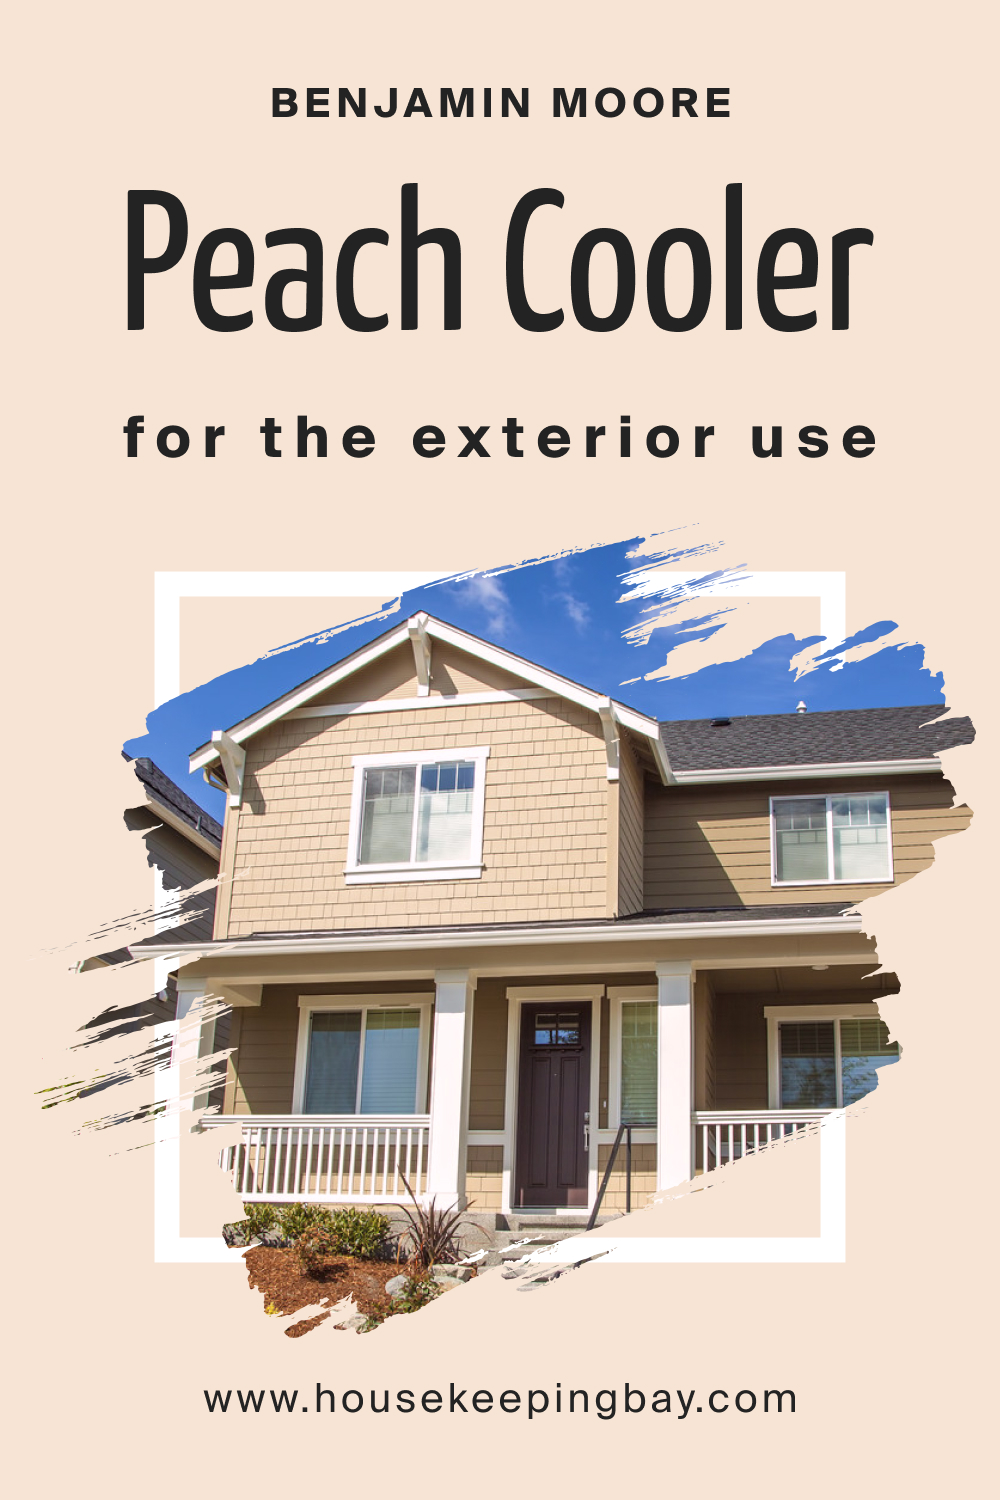 Benjamin Moore. Peach Cooler 022 for the Exterior Use